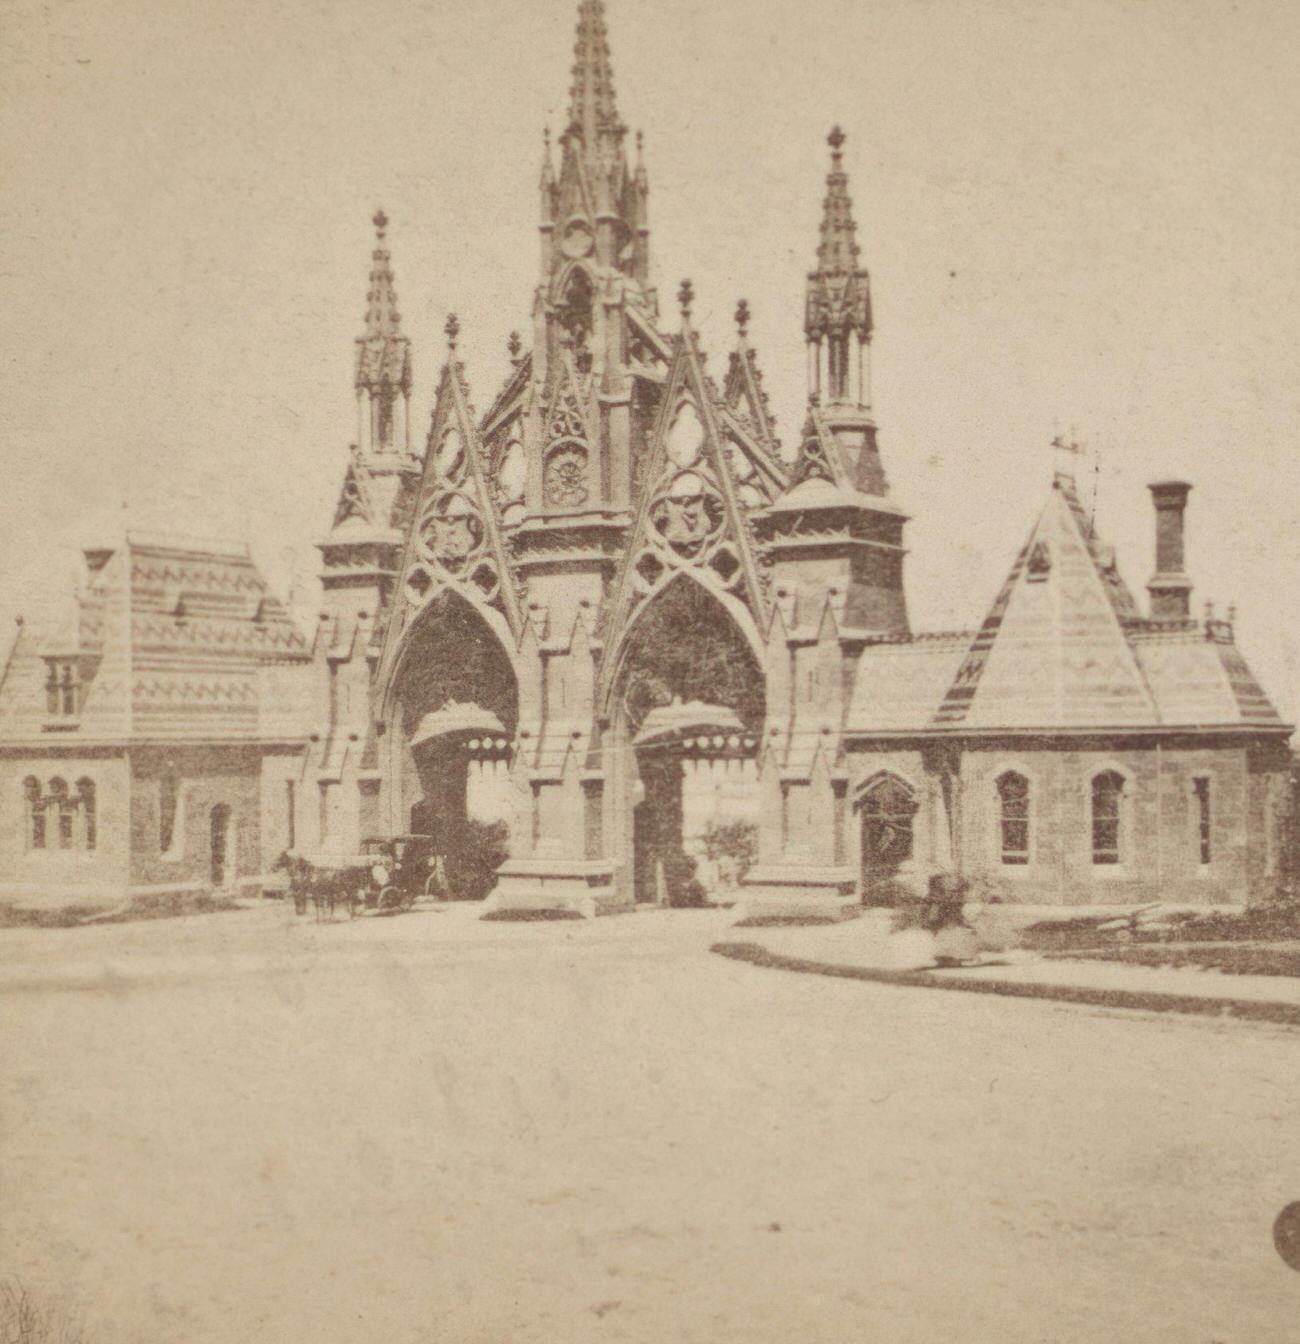 Entrance To Greenwood Cemetery In Brooklyn, 1901